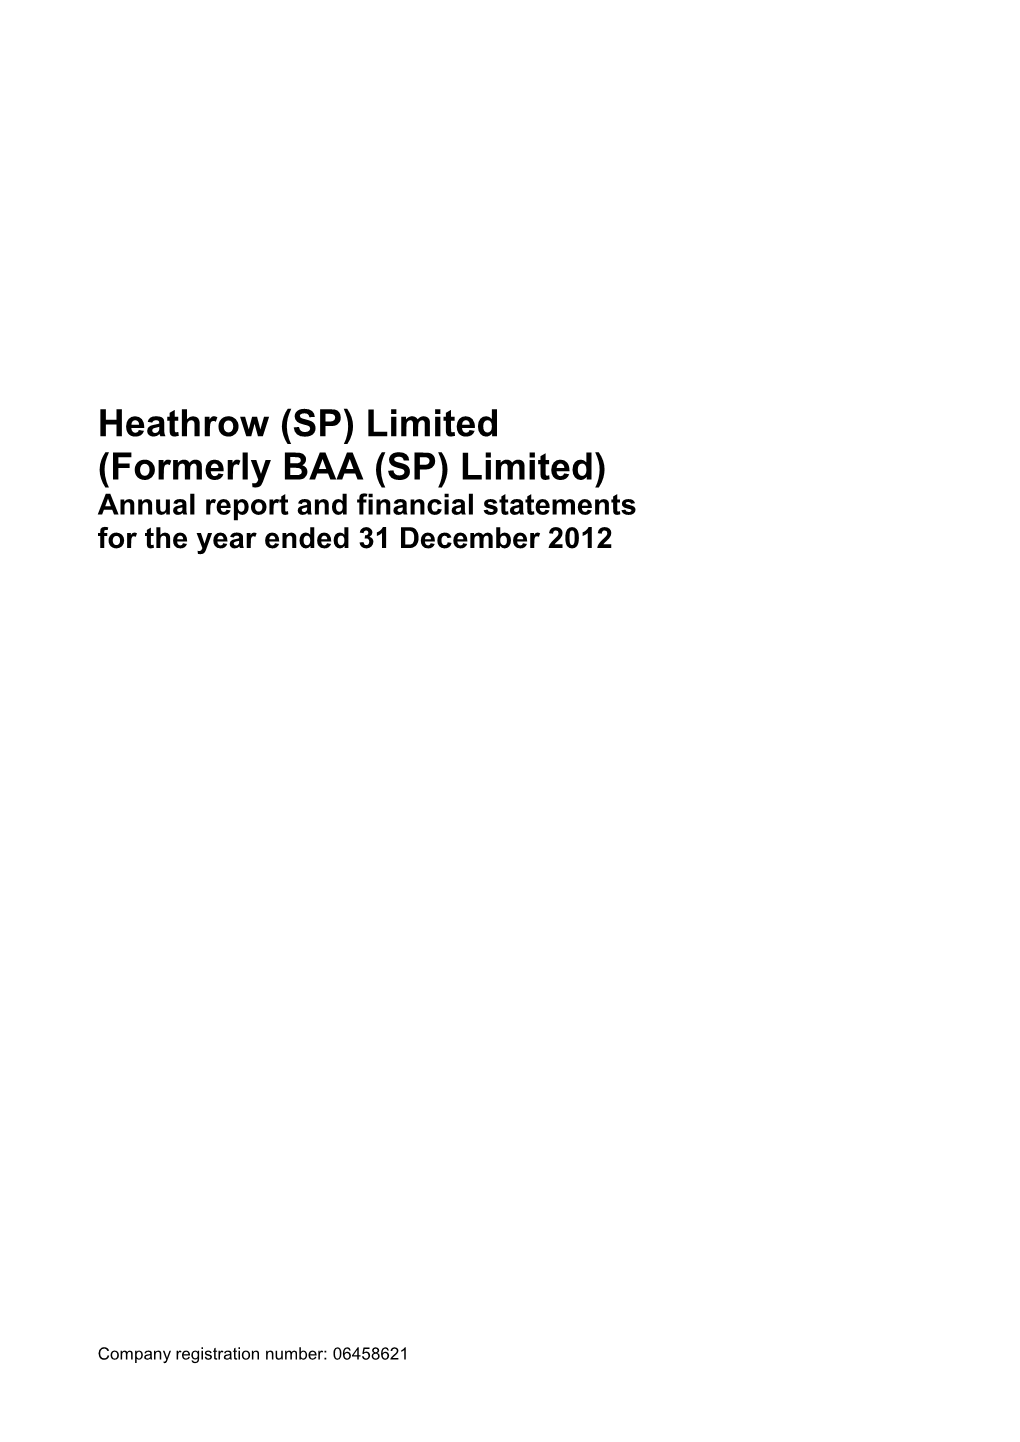 Heathrow (SP) Limited (Formerly BAA (SP) Limited) Annual Report and Financial Statements for the Year Ended 31 December 2012